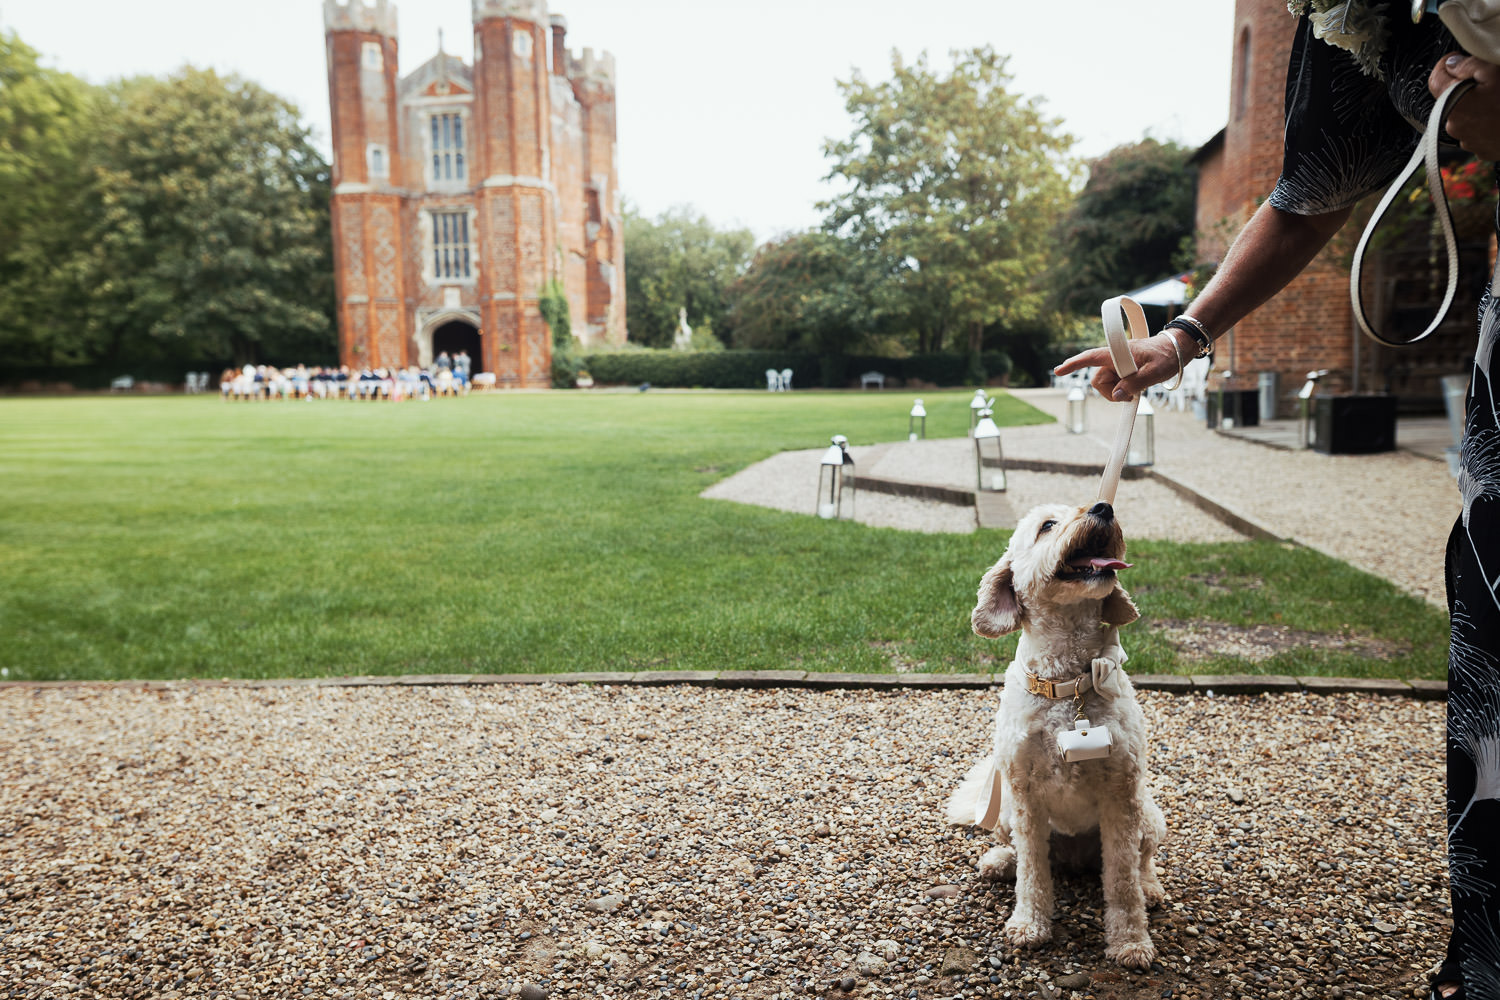 A little dog, a cockapoo, wearing the wedding rings on their collar. The Great Tower at Leez Priory wedding venue in the background.